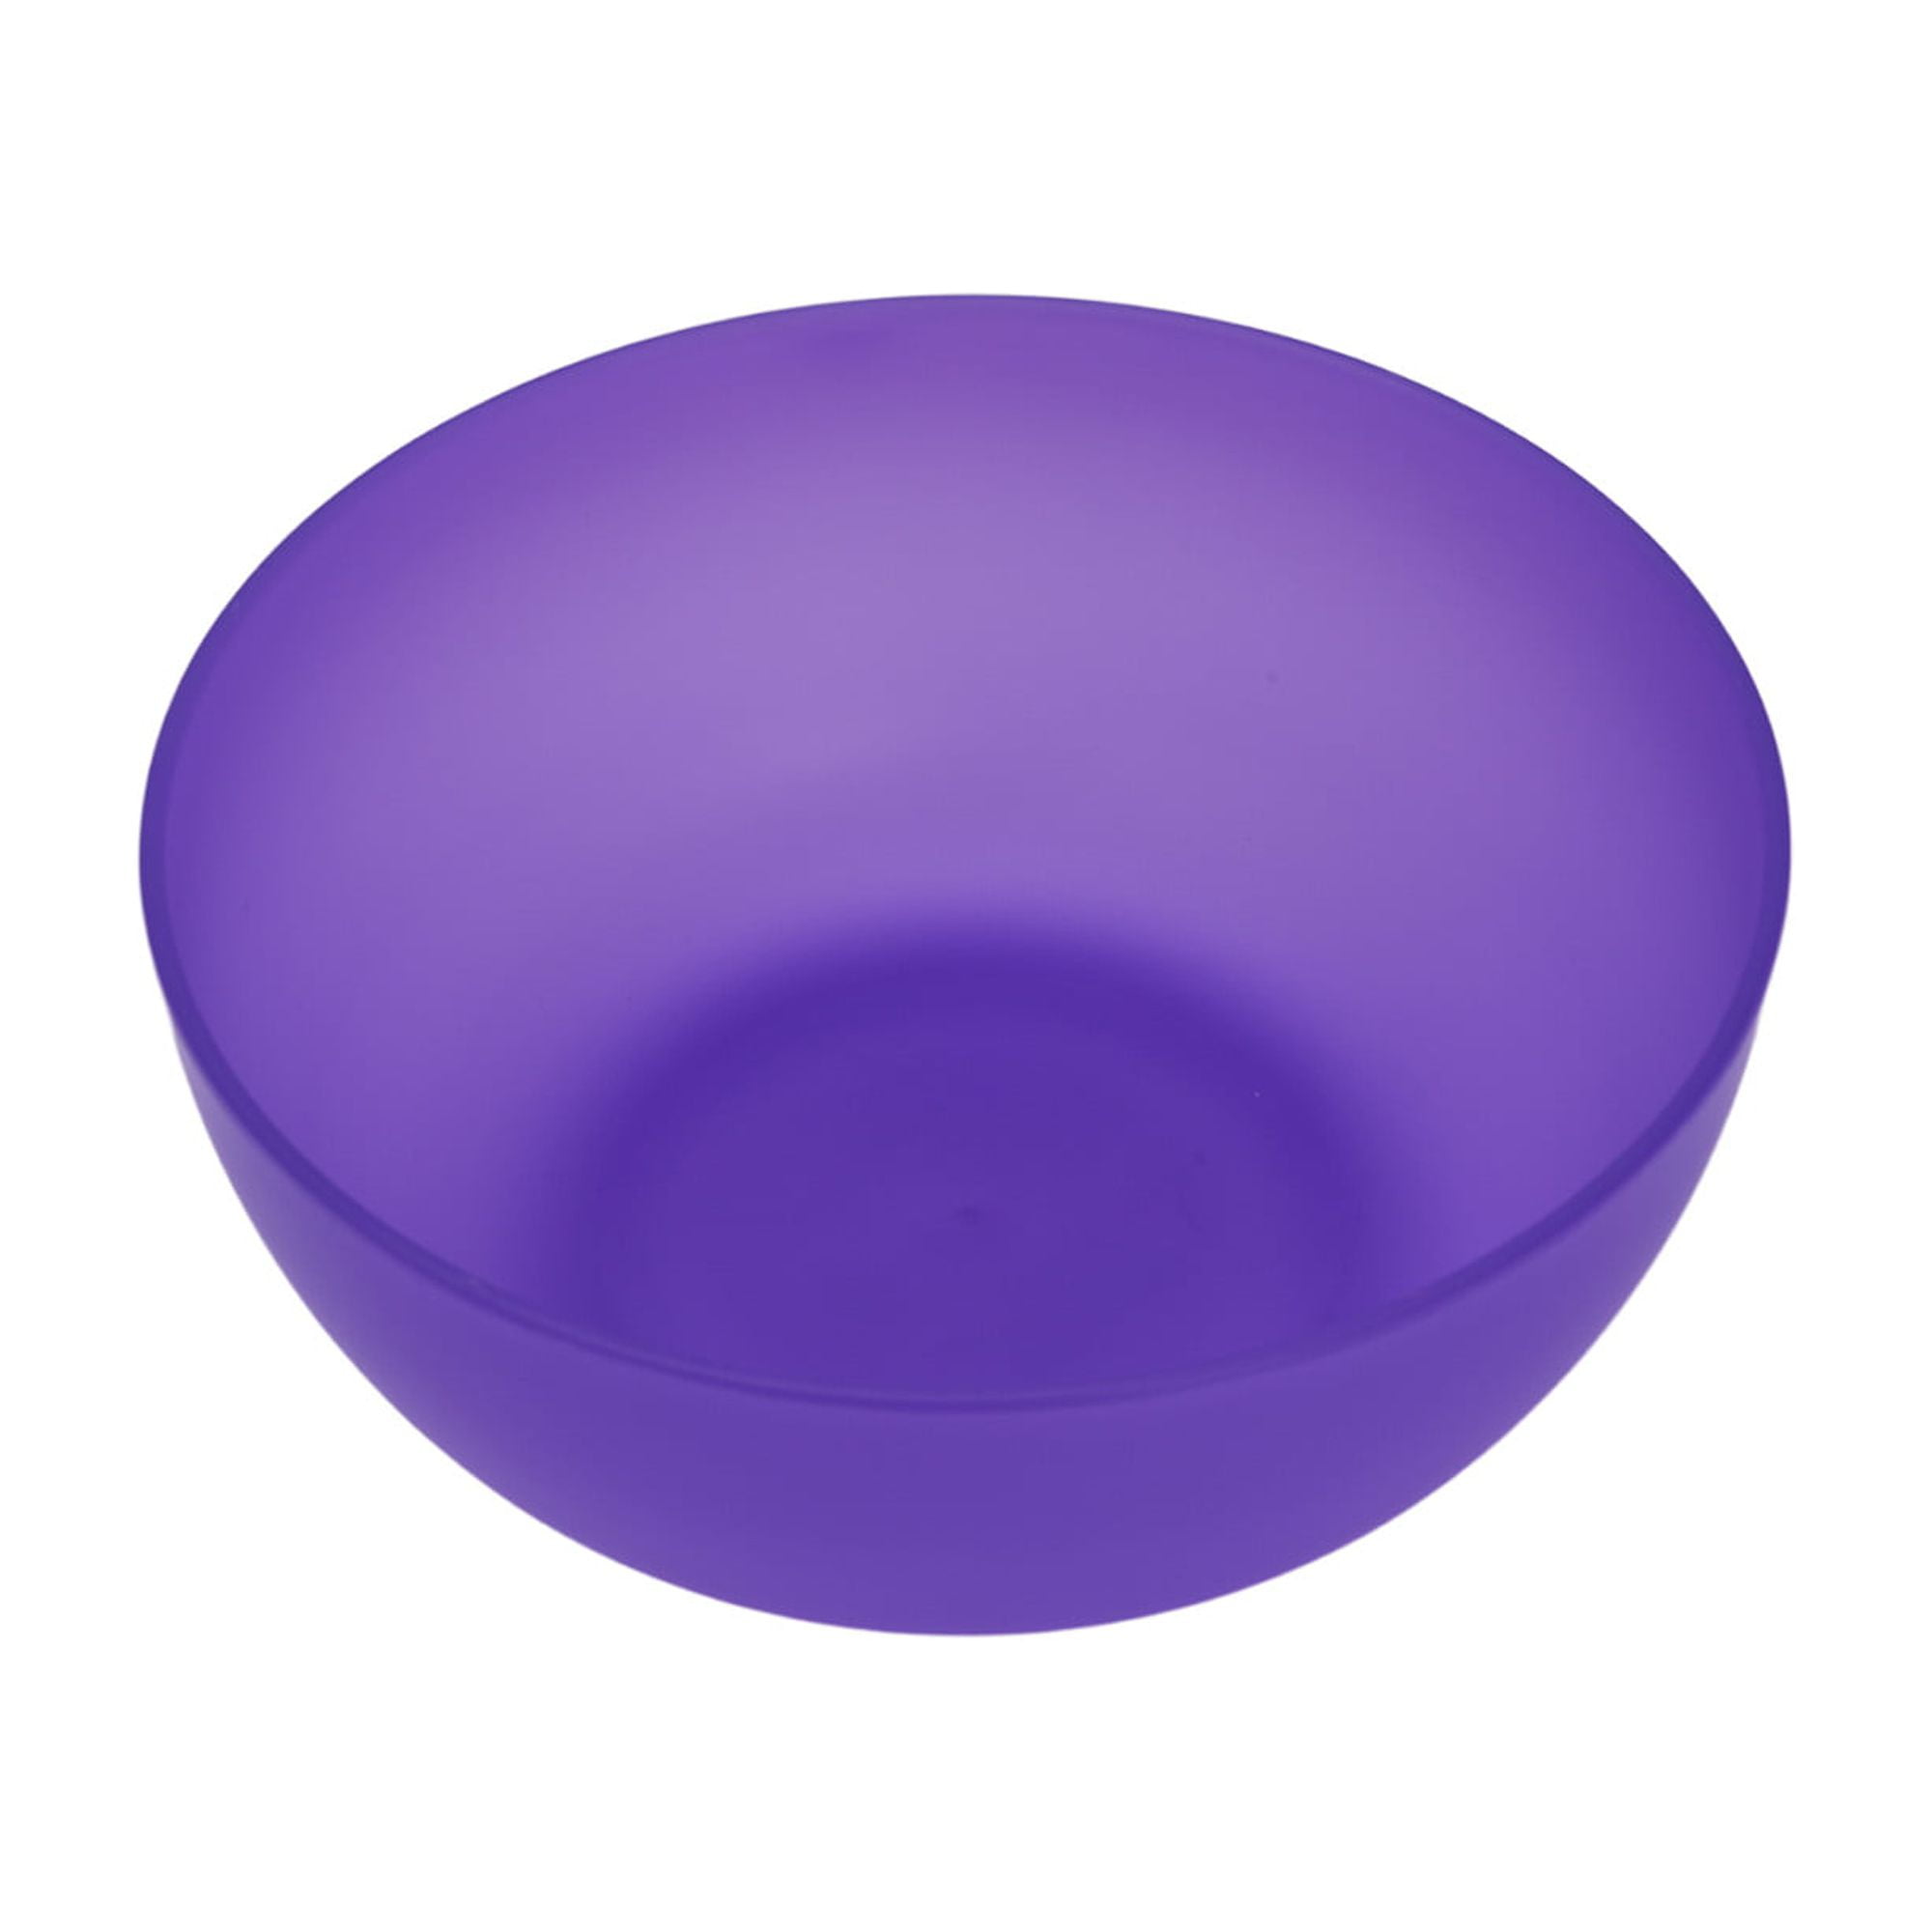 Plastic Bowls With Lids Purple, Blue, Light Blue Collection Of 4